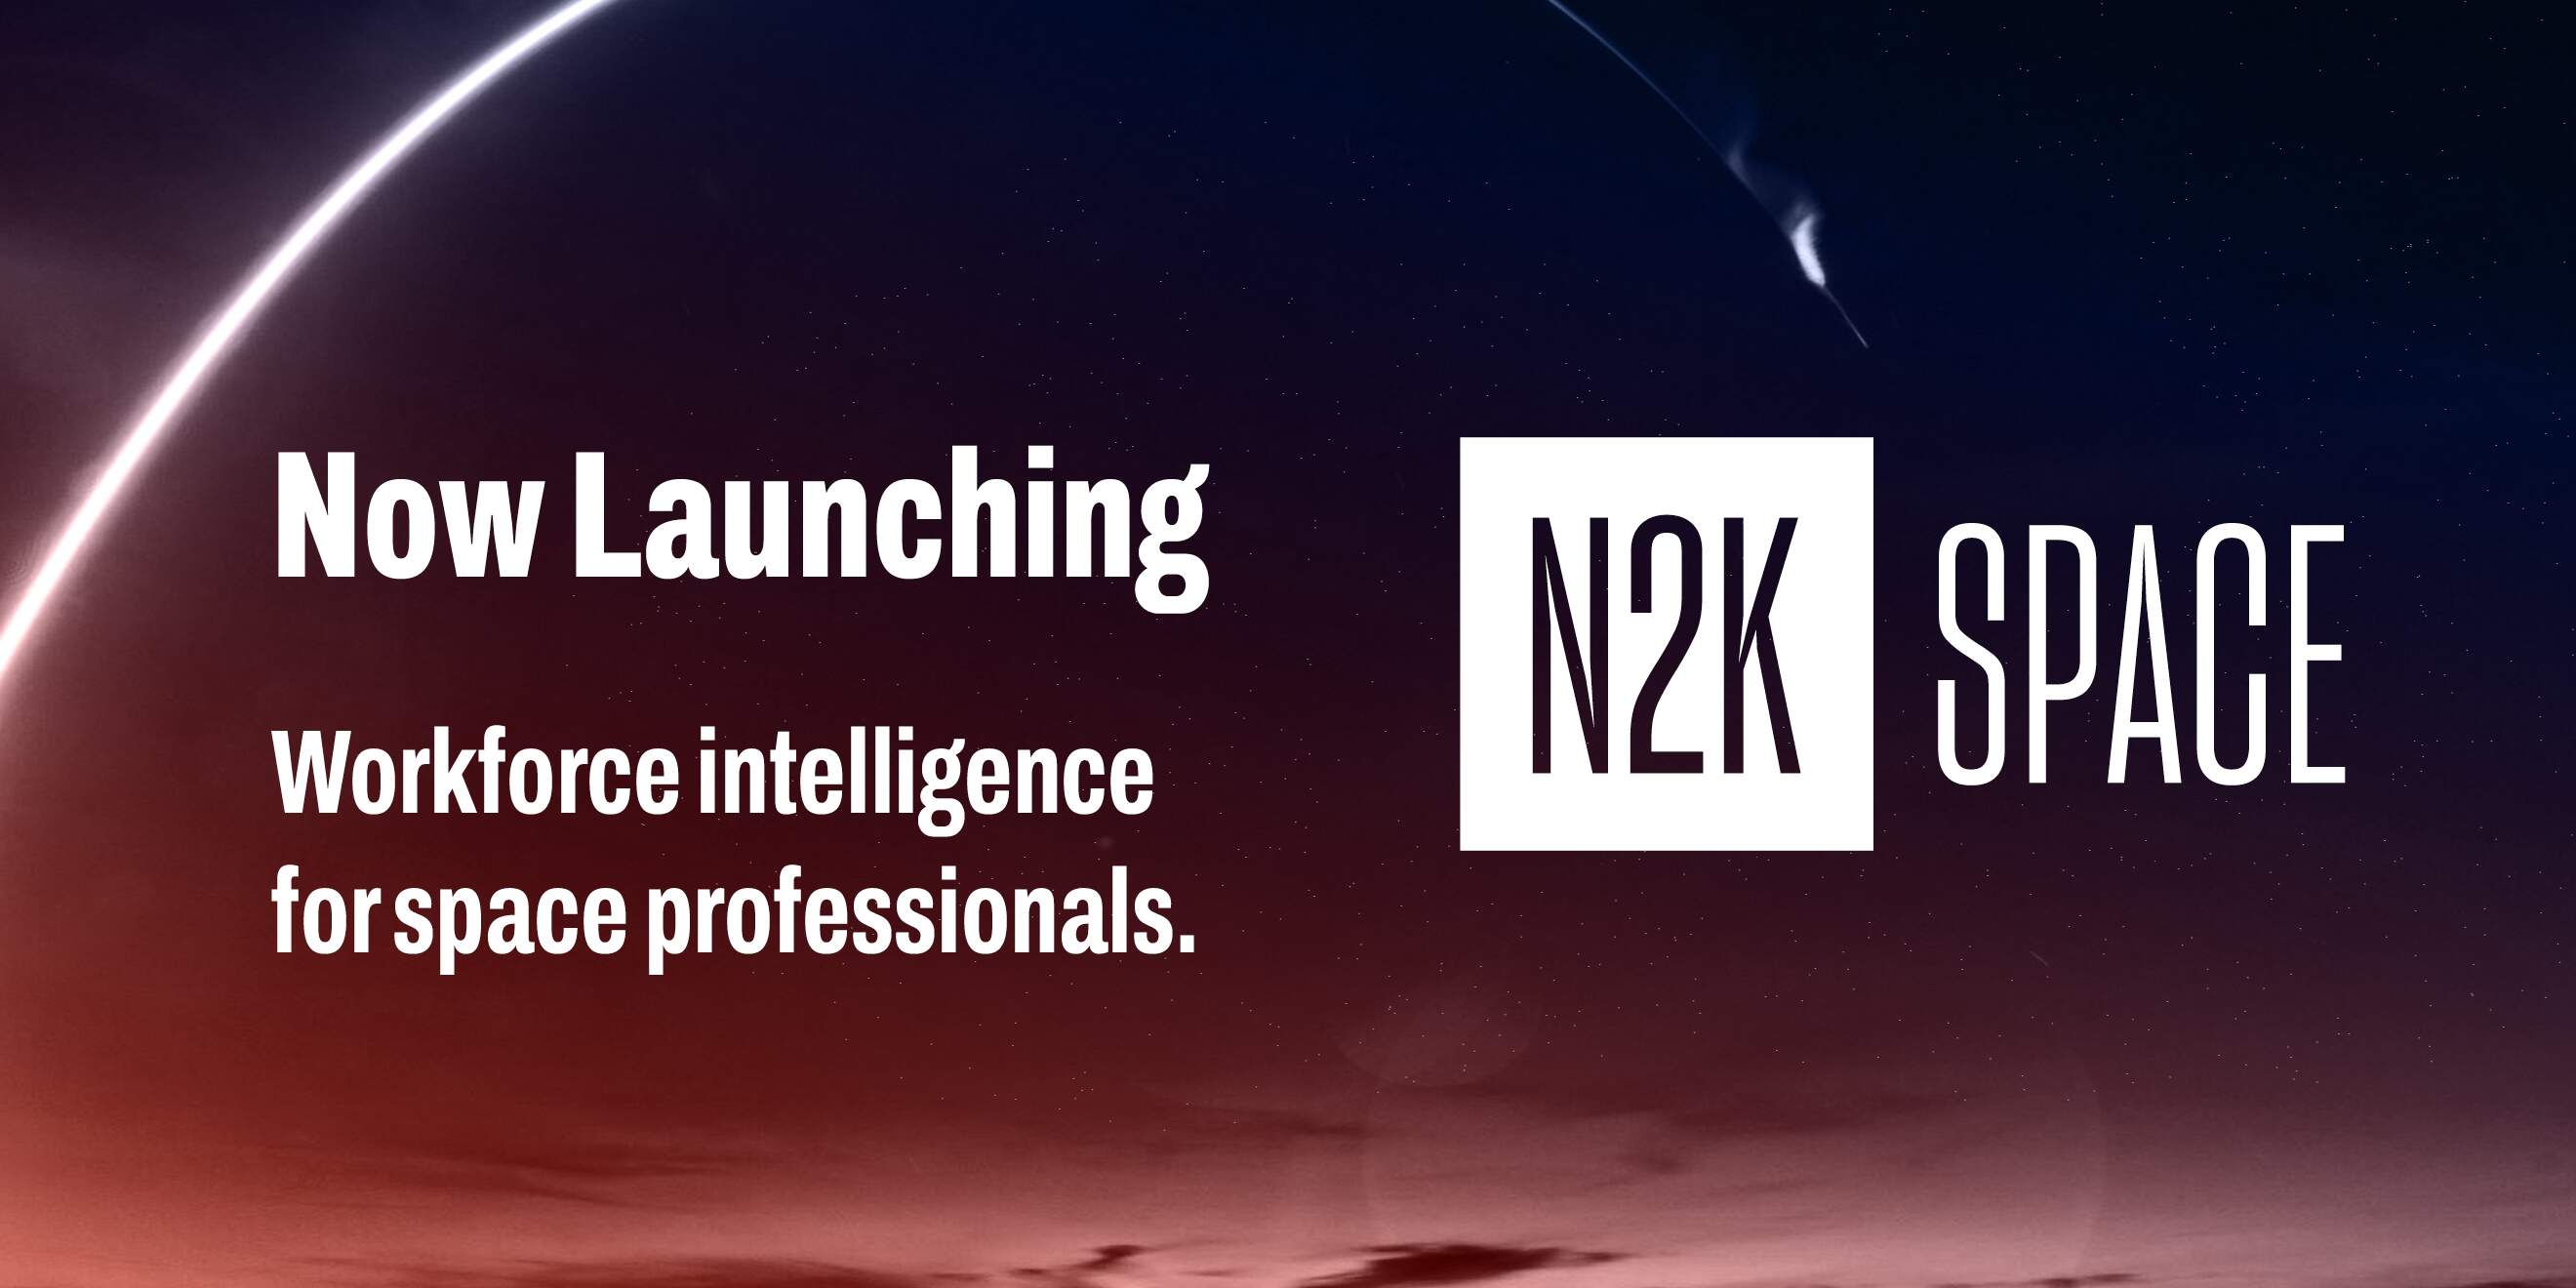 N2K Networks launches T-Minus Space Daily, the world’s only daily space news podcast.